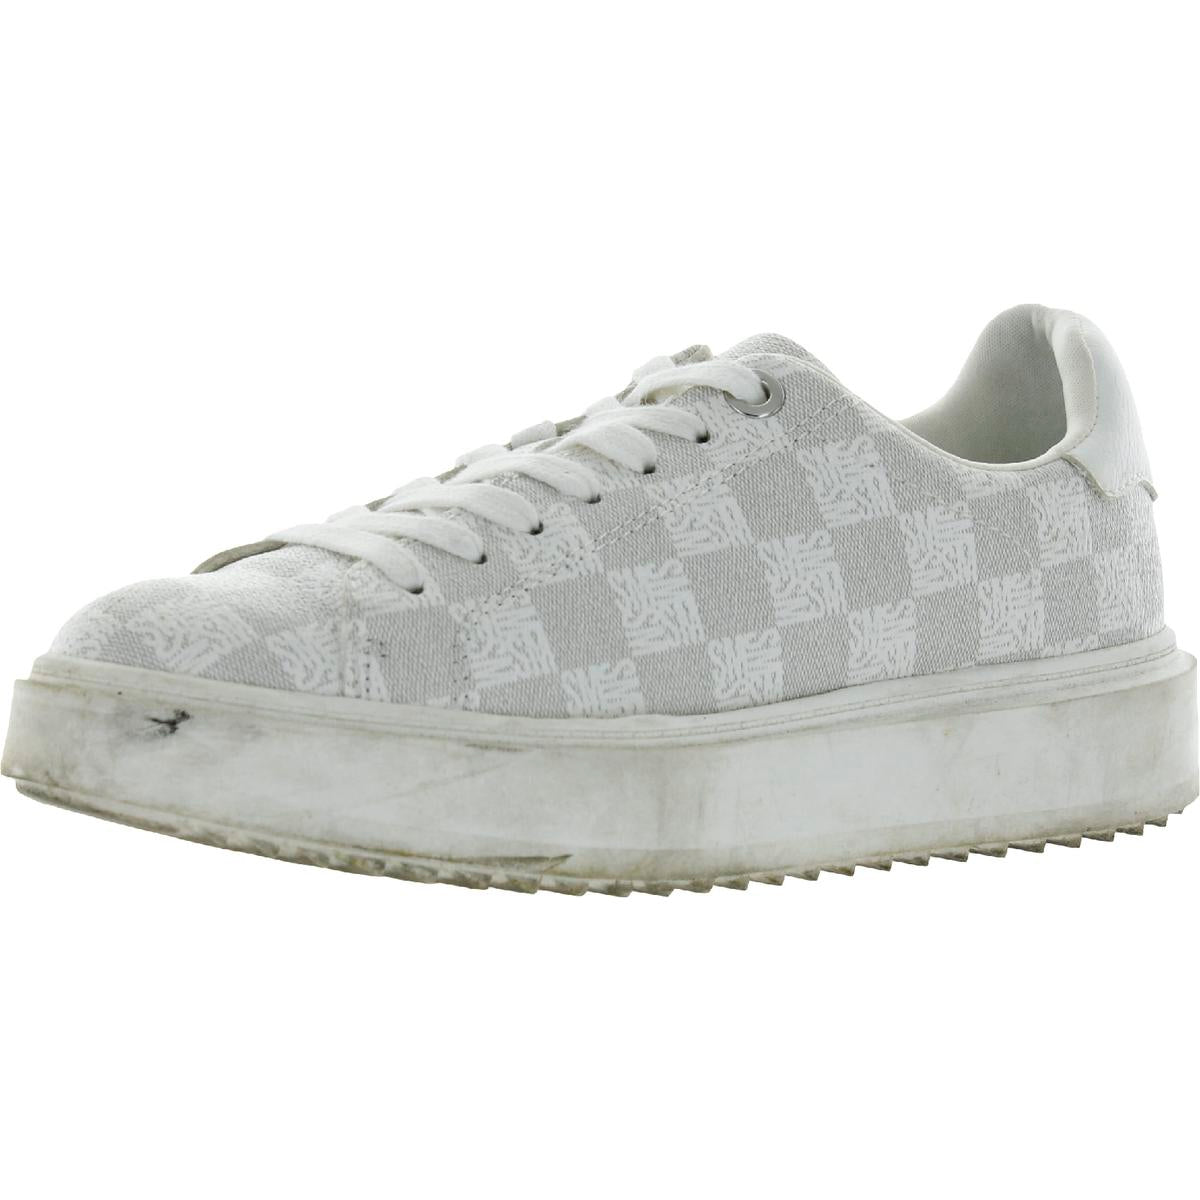 lv white sneakers, Off 78%